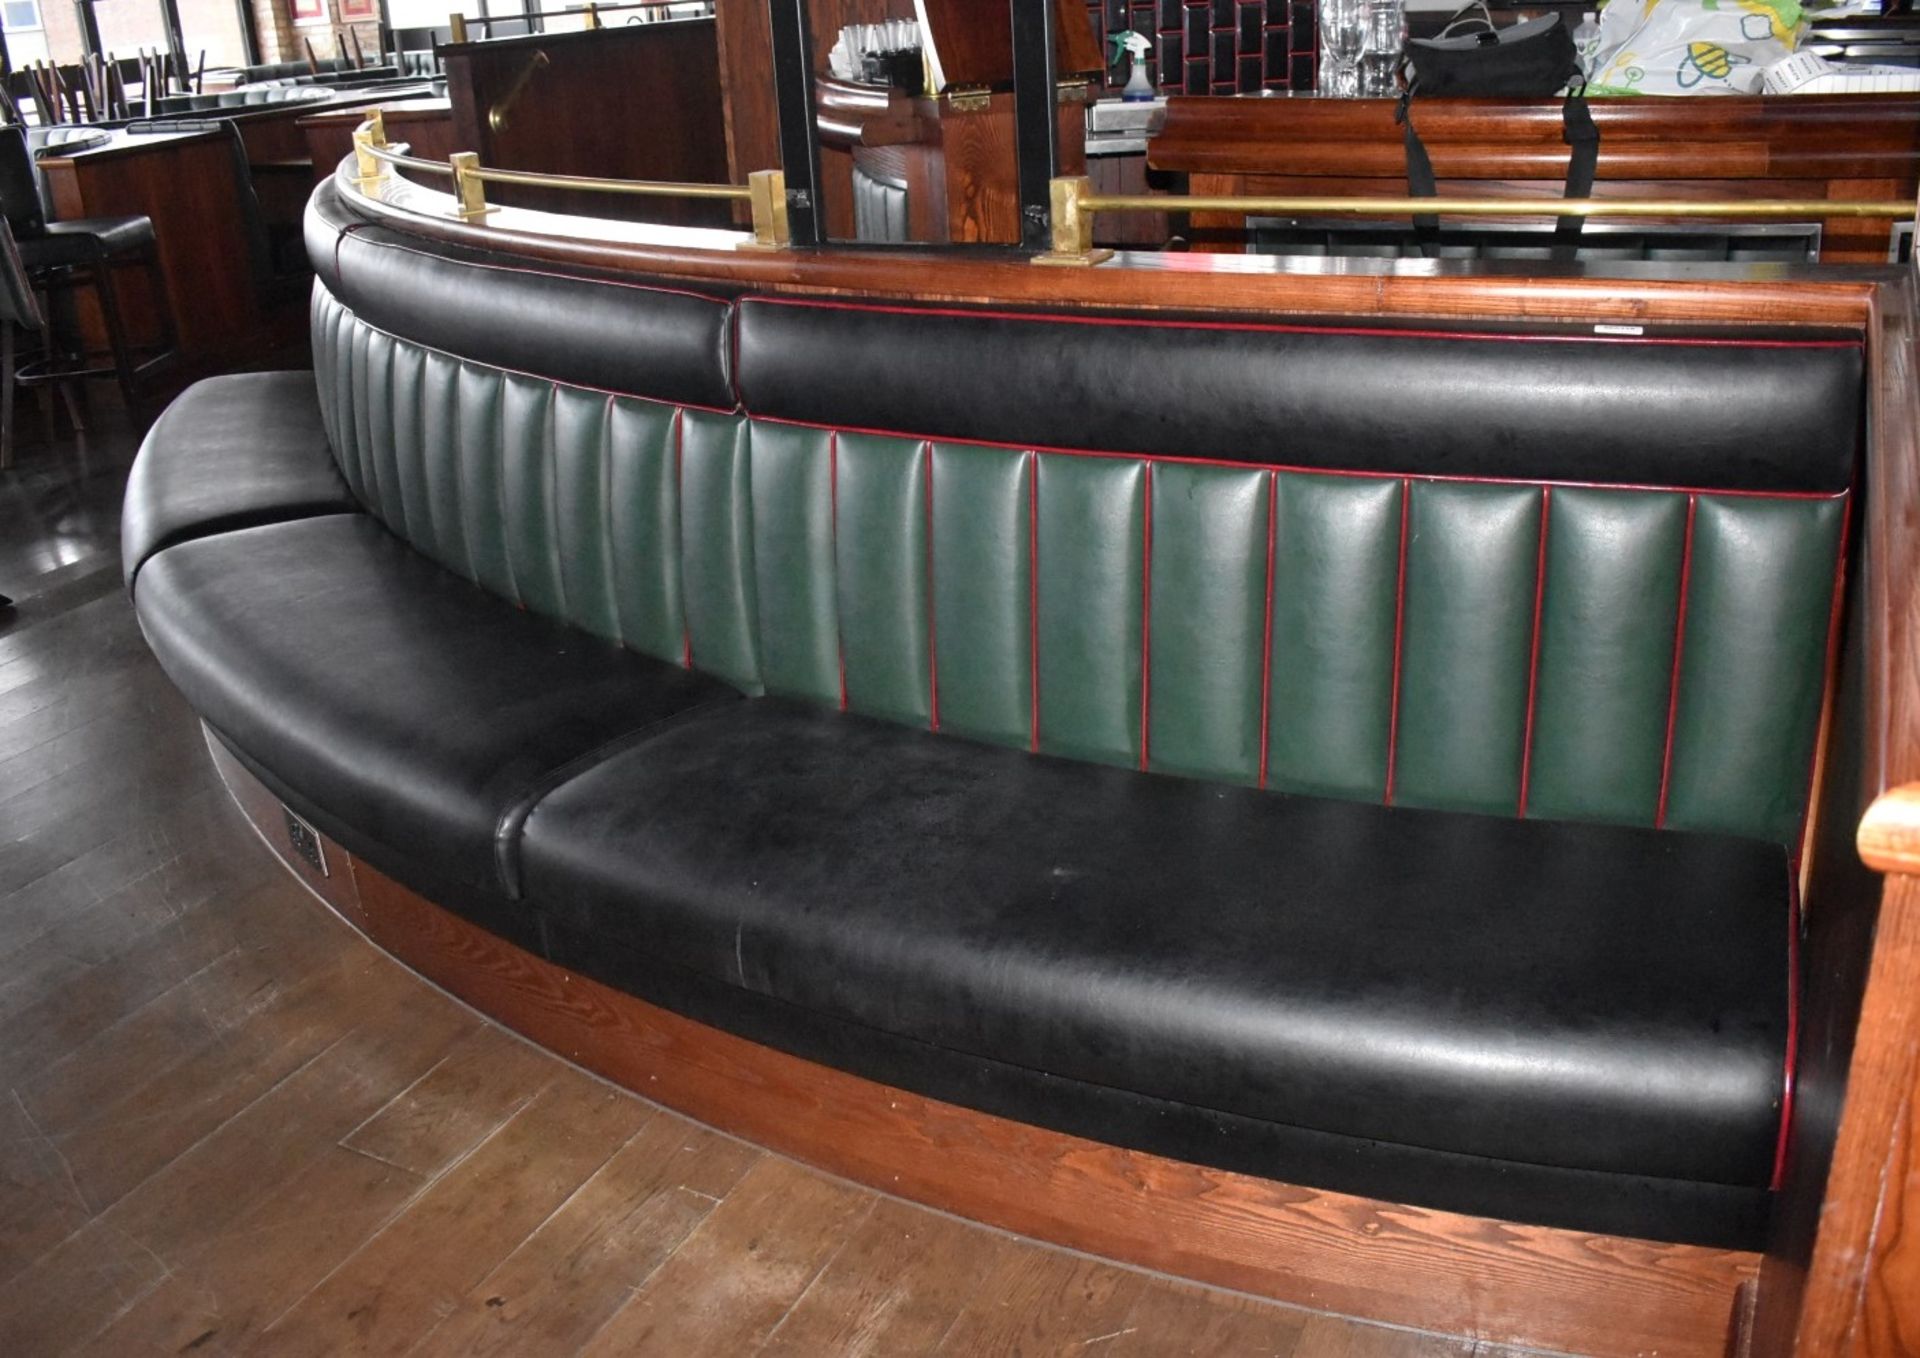 1 x Banqueting Seating Bench - 15ft in Length - Green & Black Upholstery With Vertical Fluted Back - Image 11 of 11